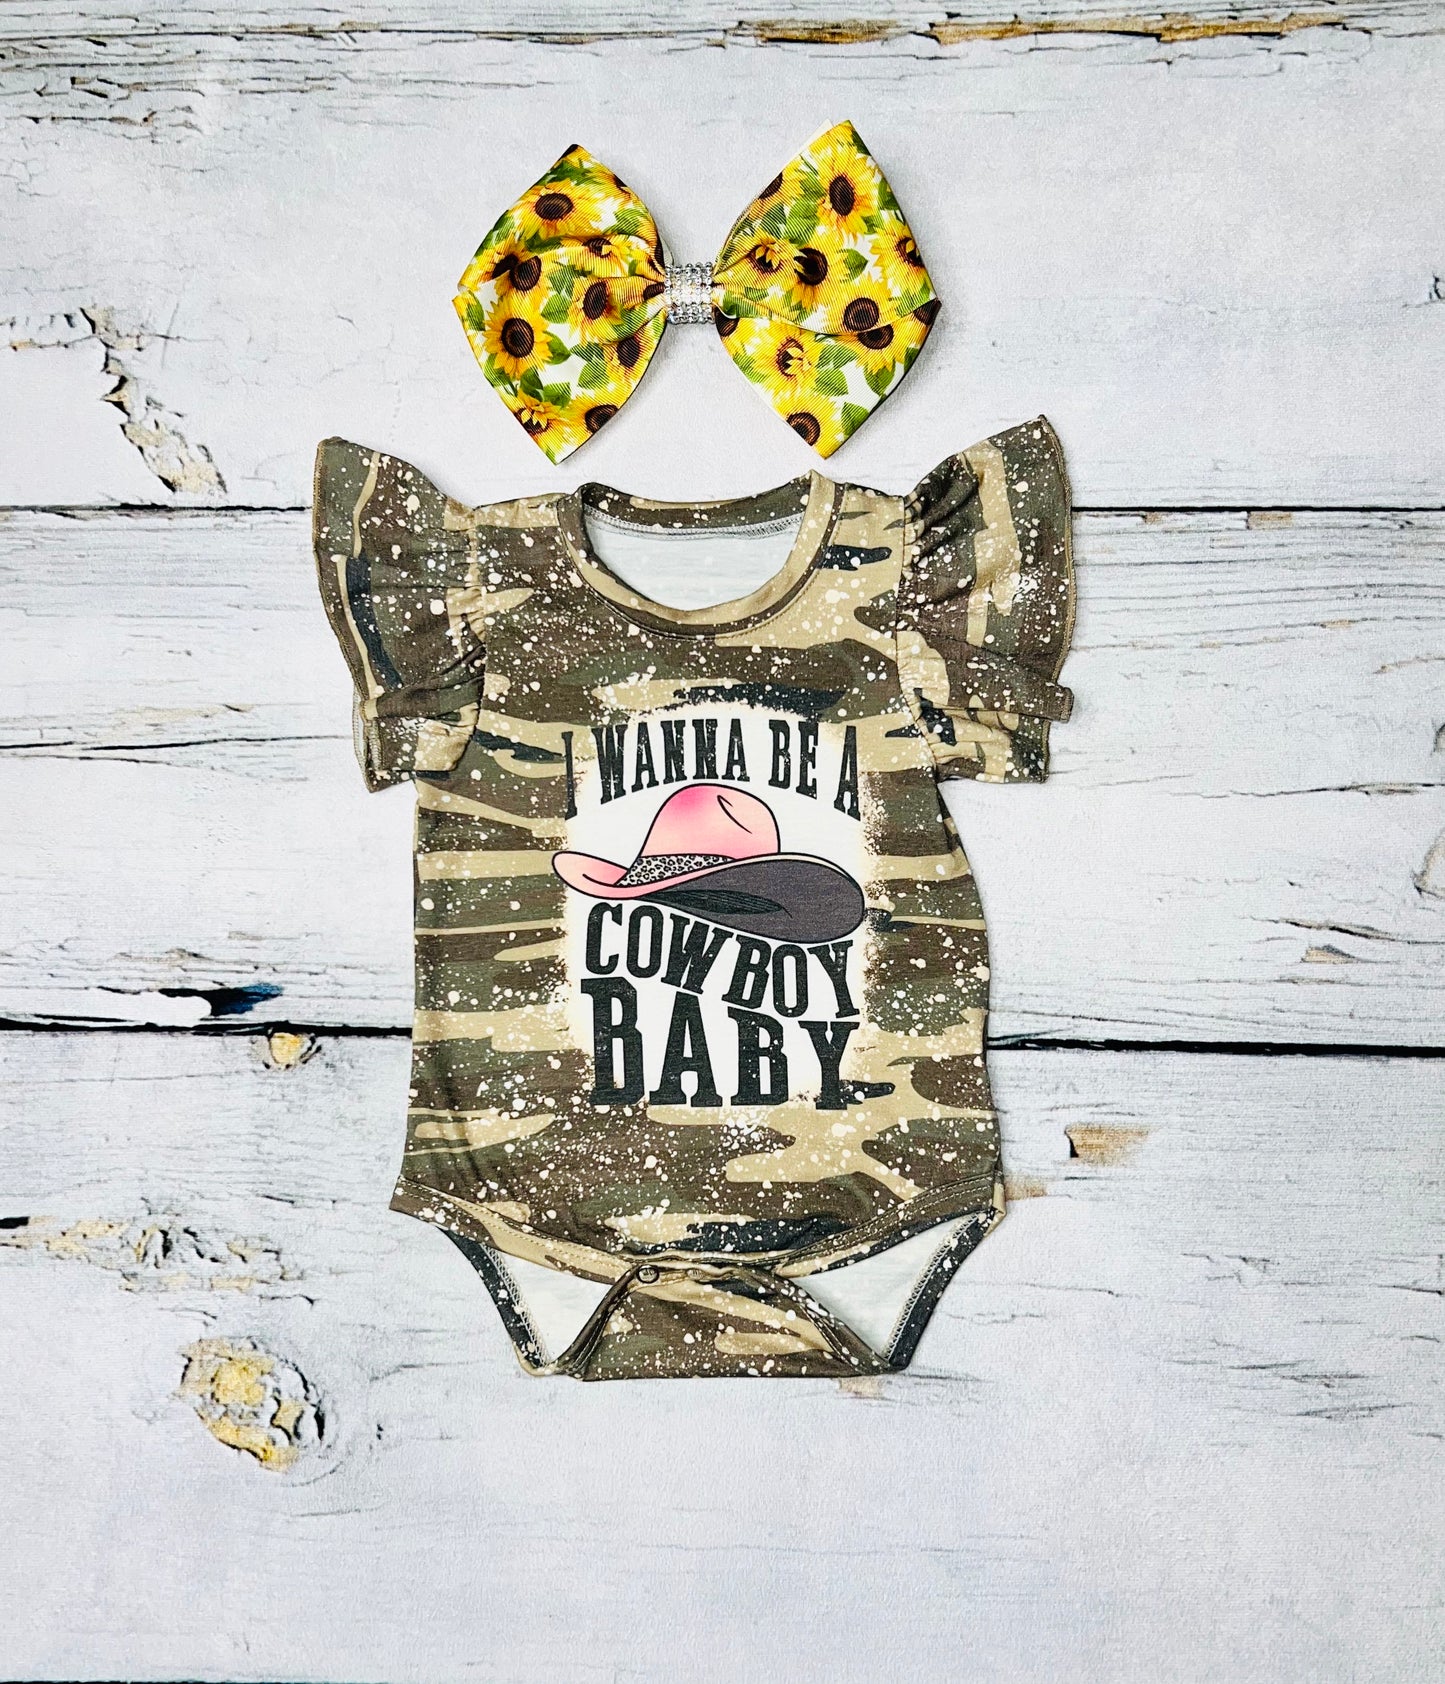 "I WANNA BE A COWBOY BABY" green camo baby onesie DLH1224-08